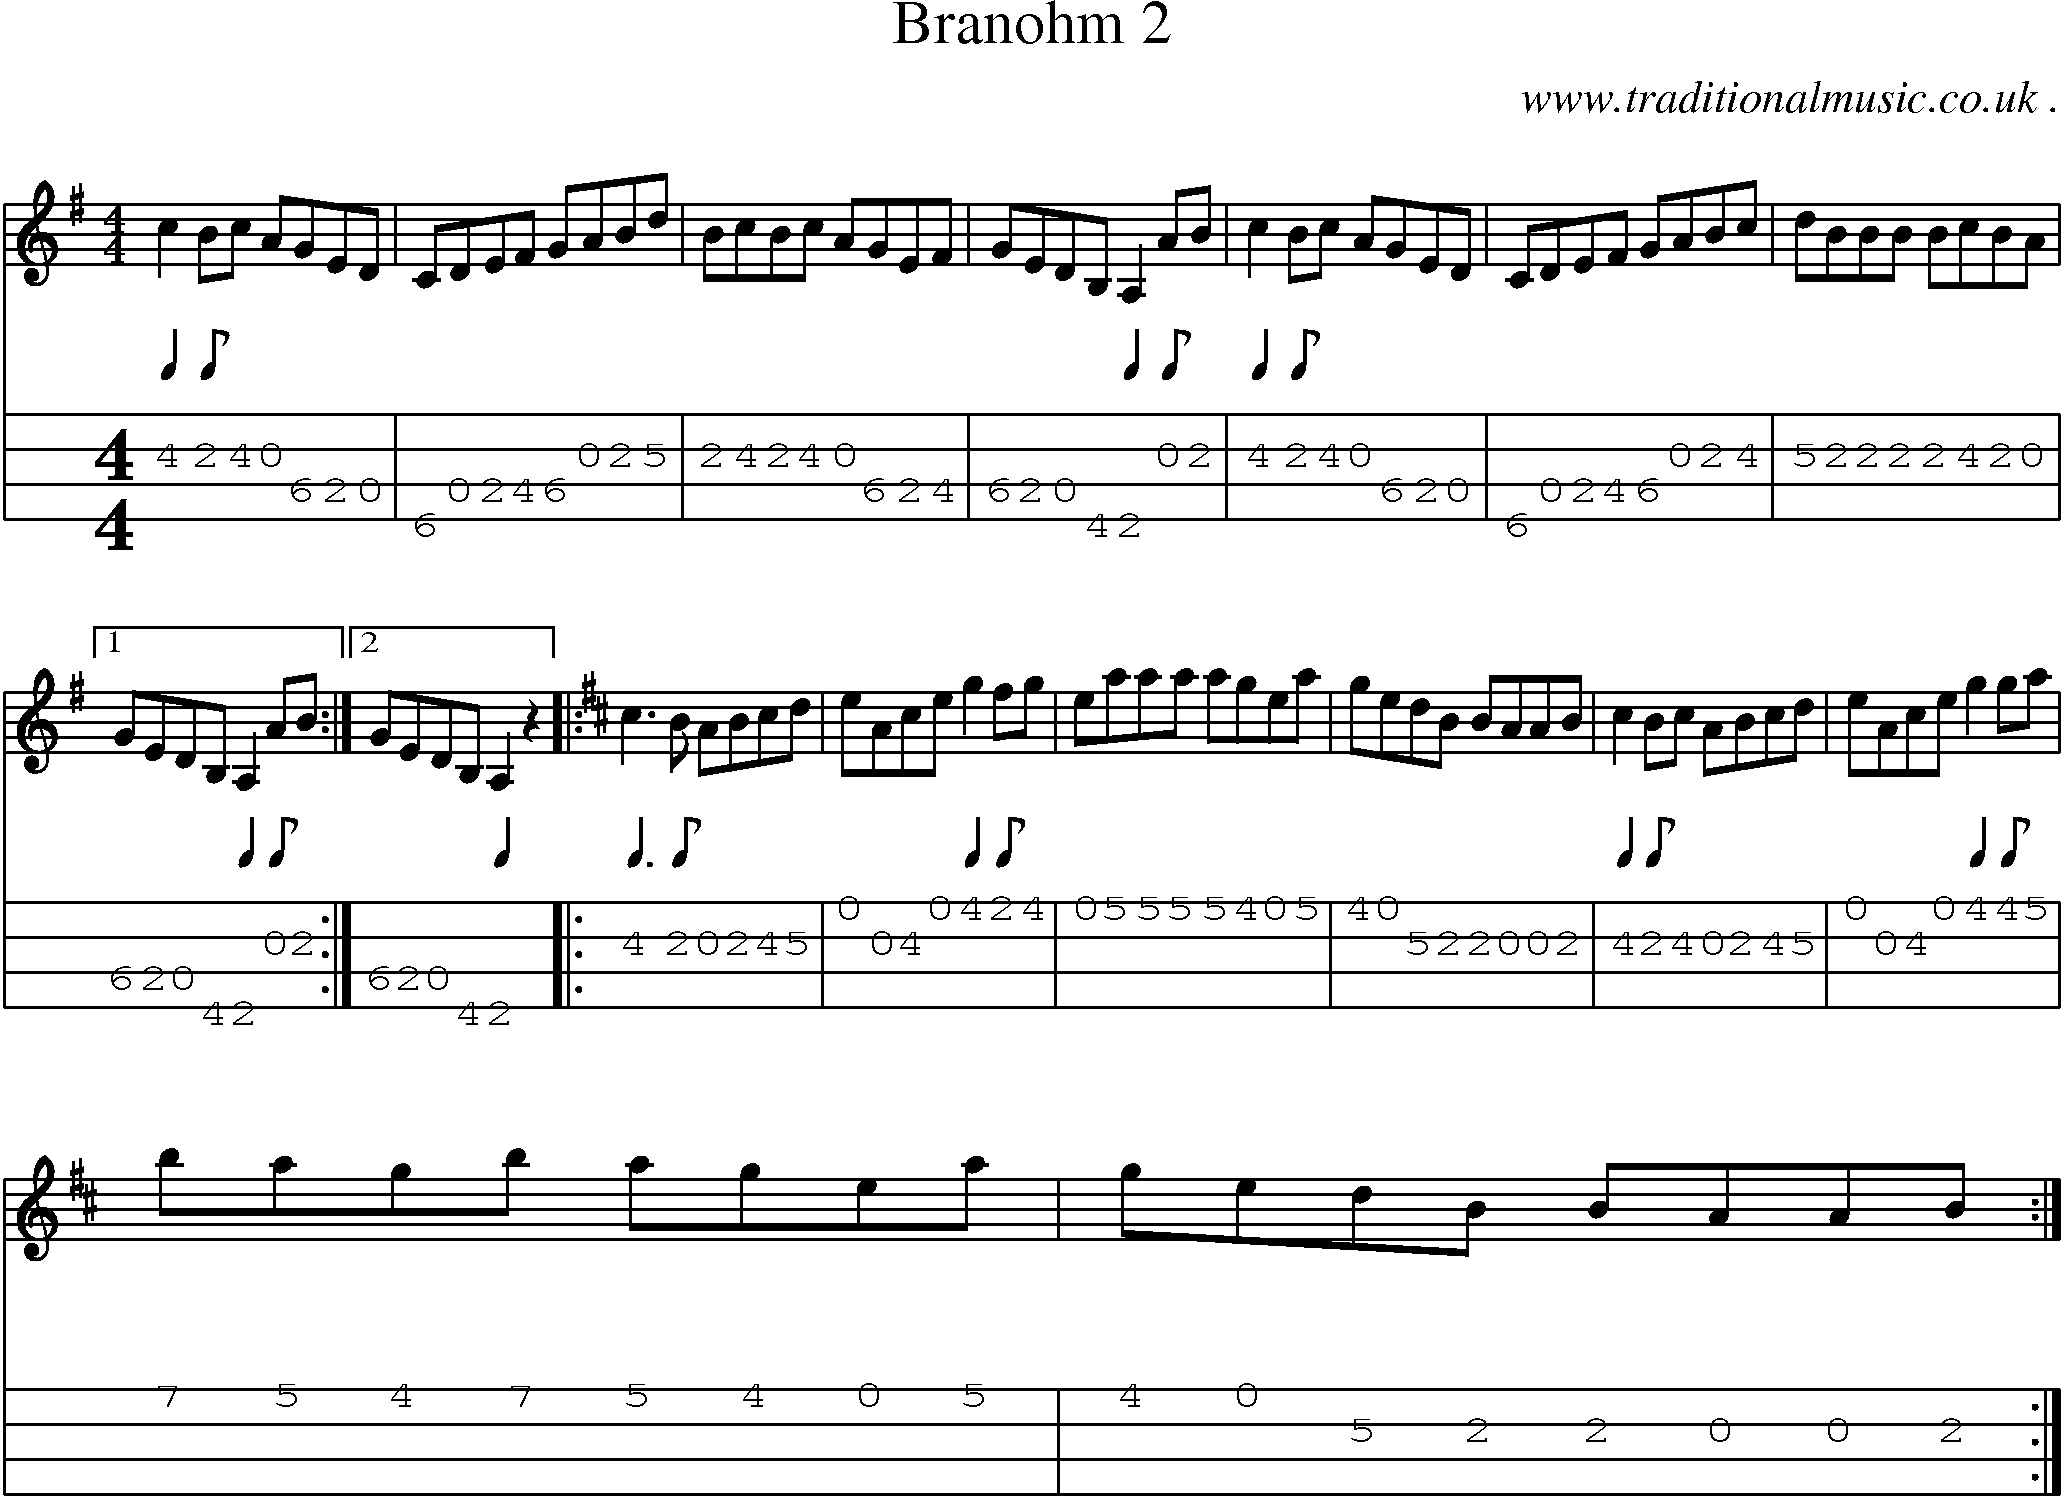 Sheet-Music and Mandolin Tabs for Branohm 2